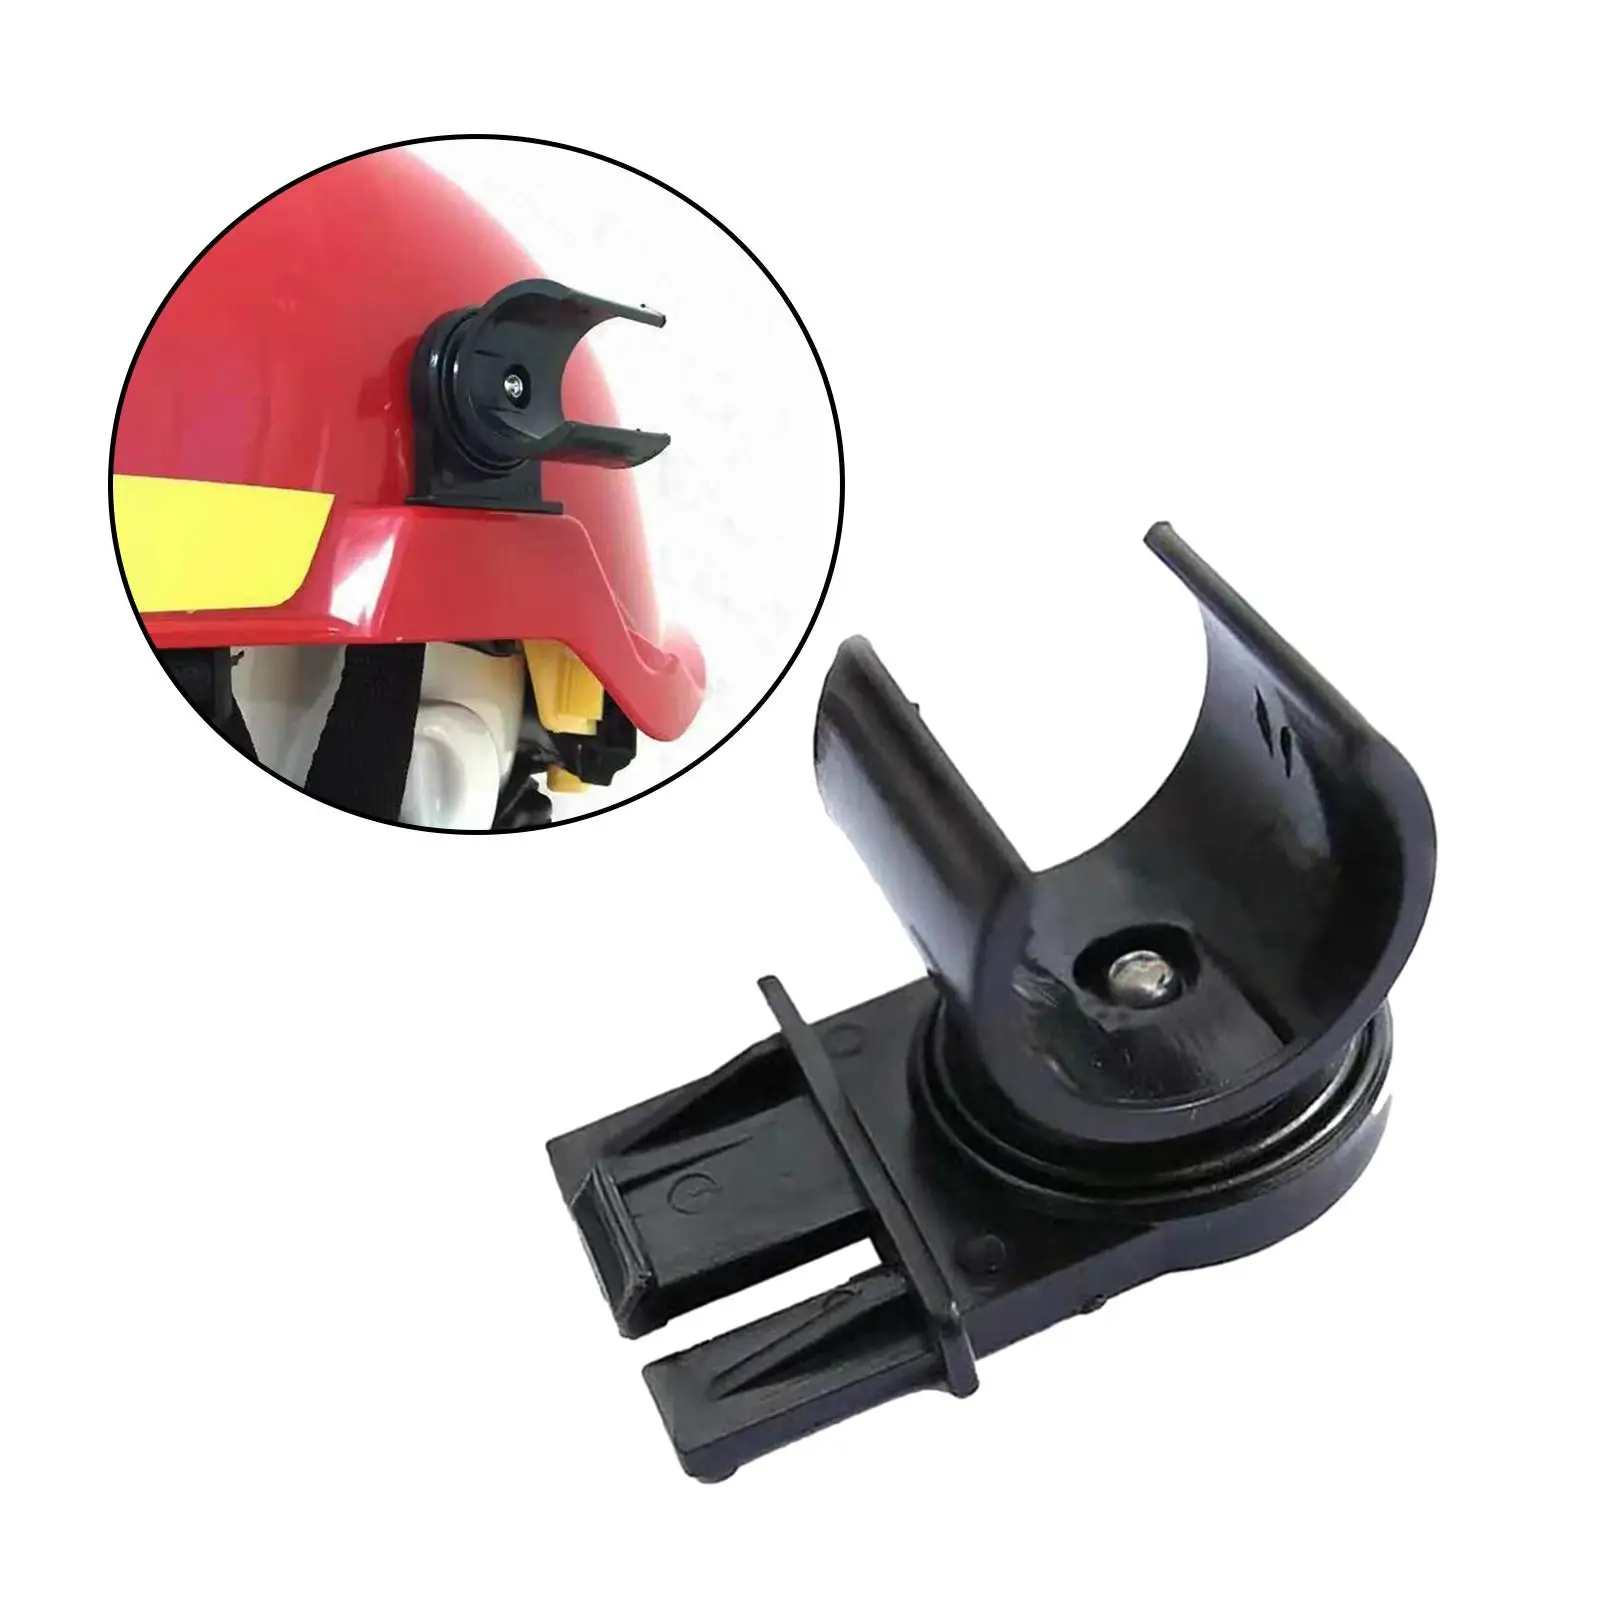 Hard Hats Flashlight Holder Headlamp Clips for Helmet Easily Mount for Outdoor Cycling